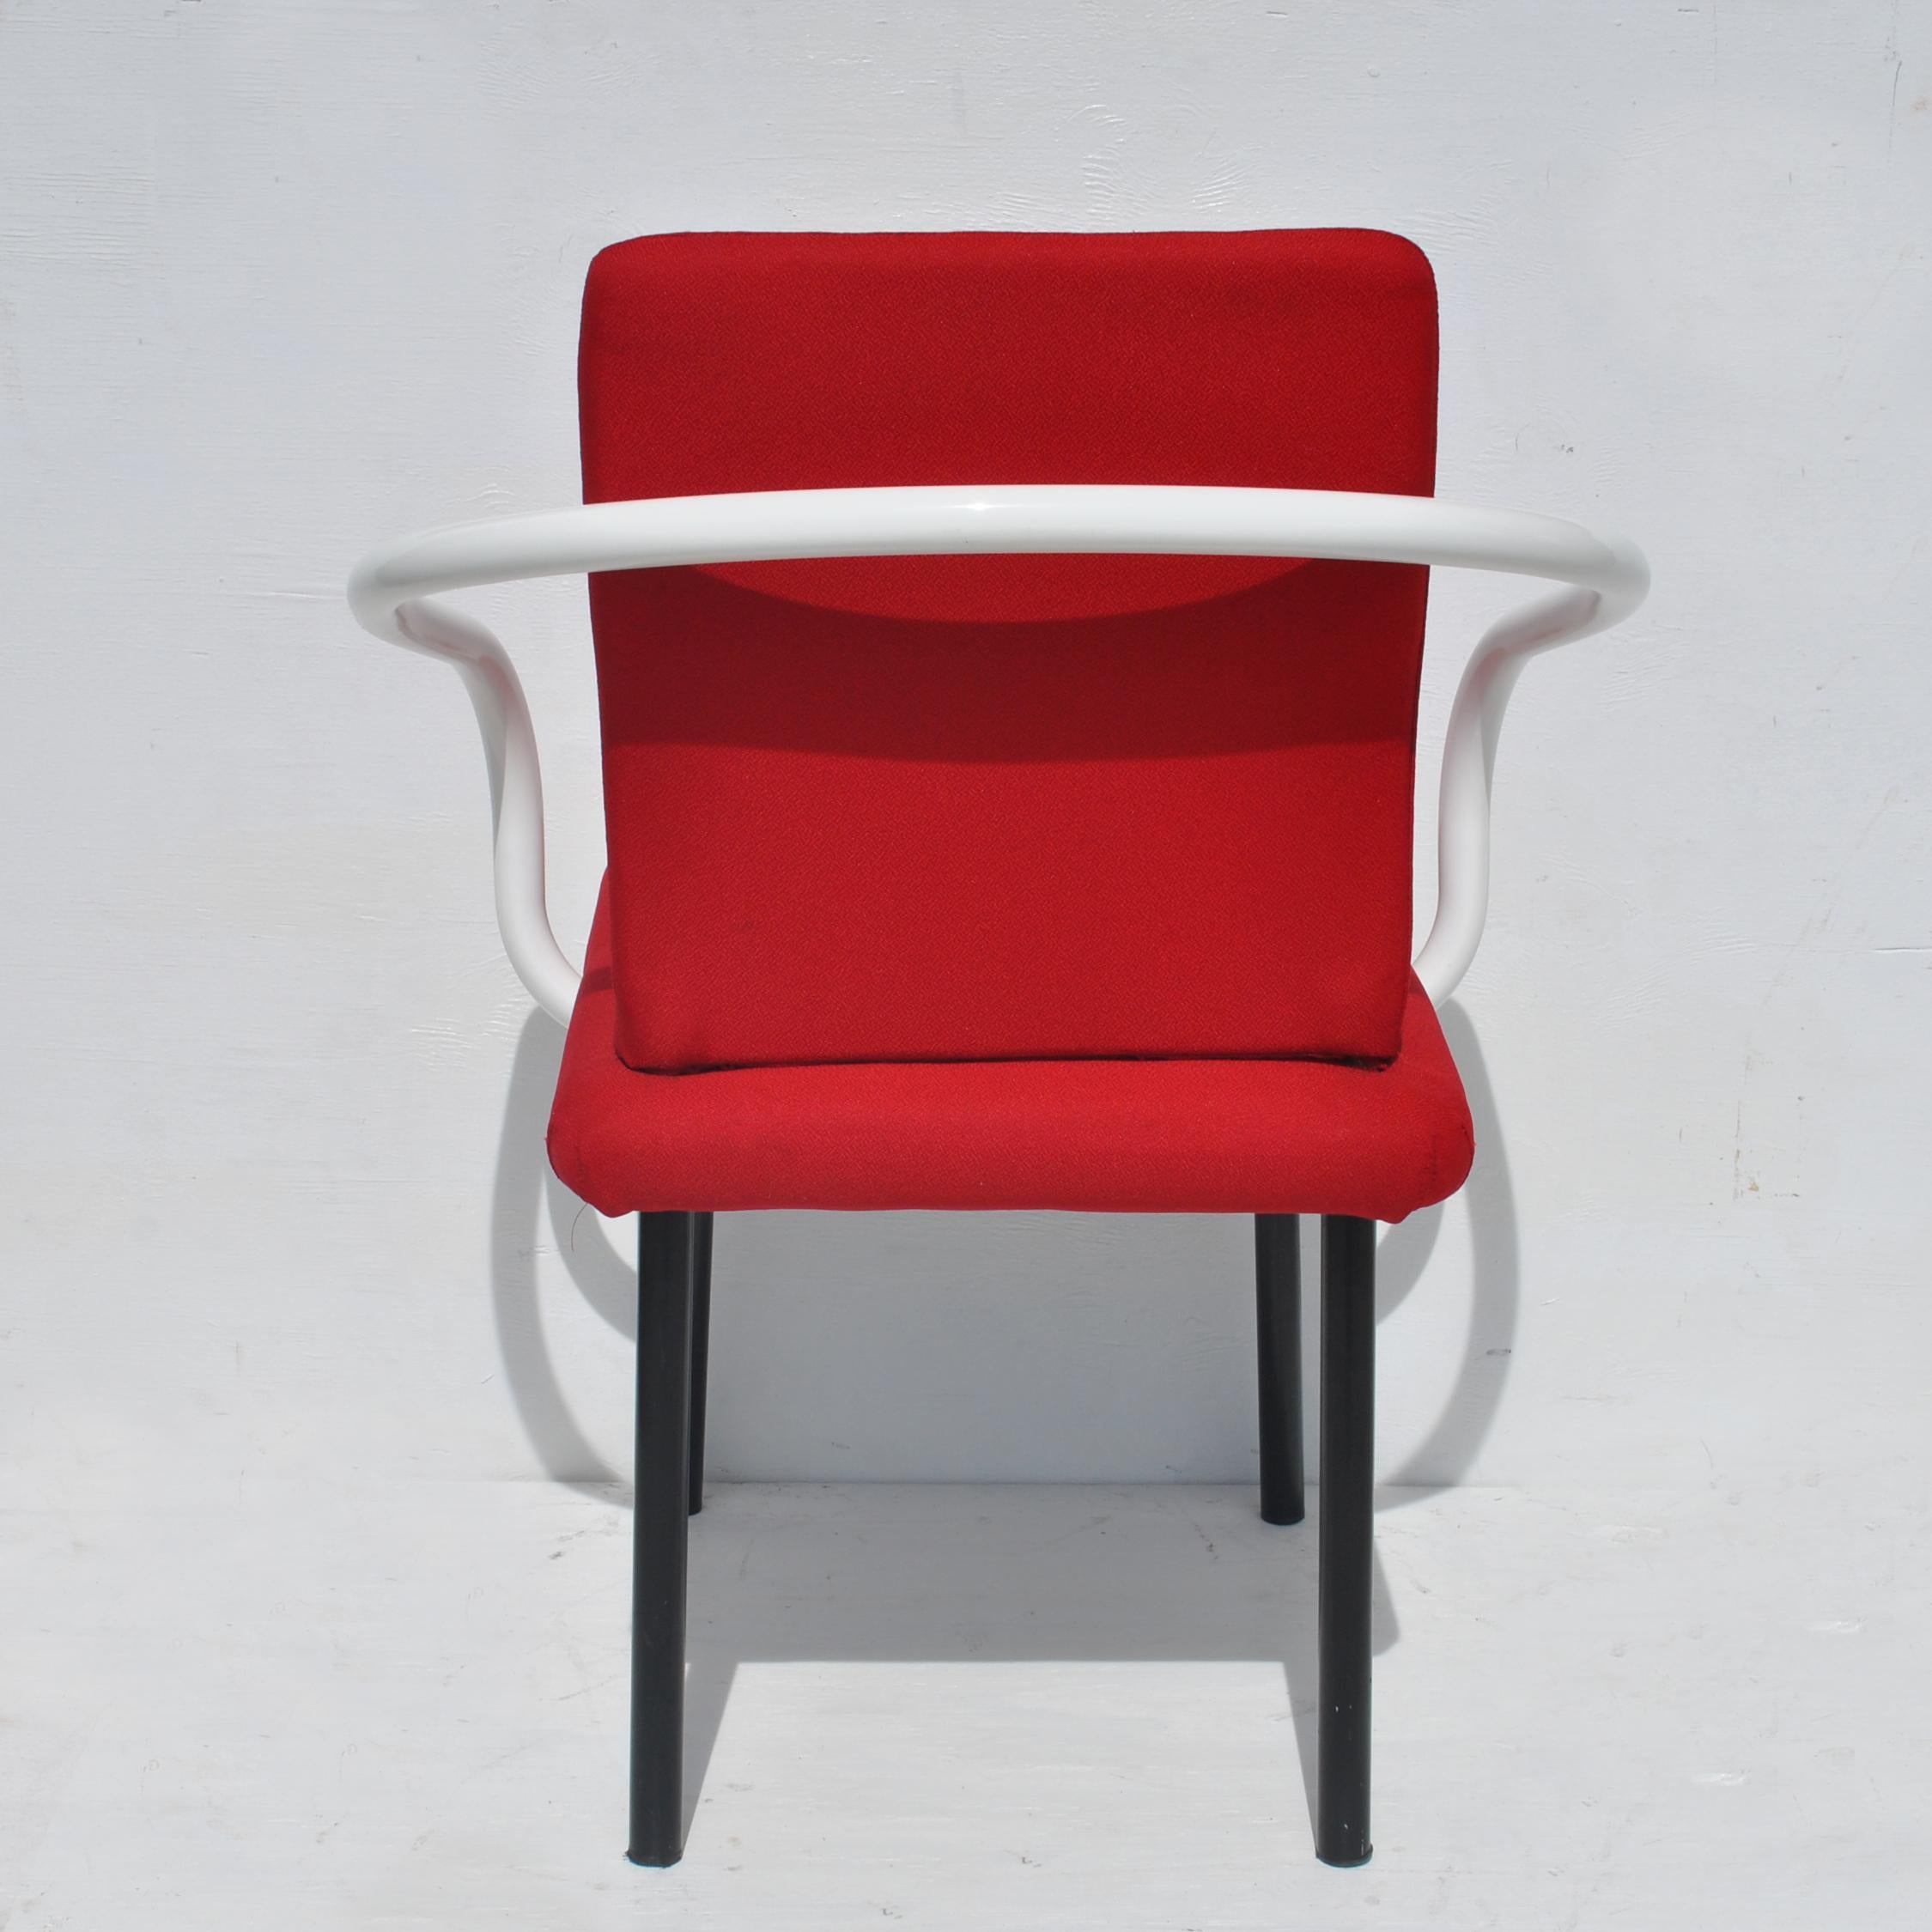 European Set of Eight Mandarin Dining Chairs Designed by Ettore Sottsass for Knoll  For Sale